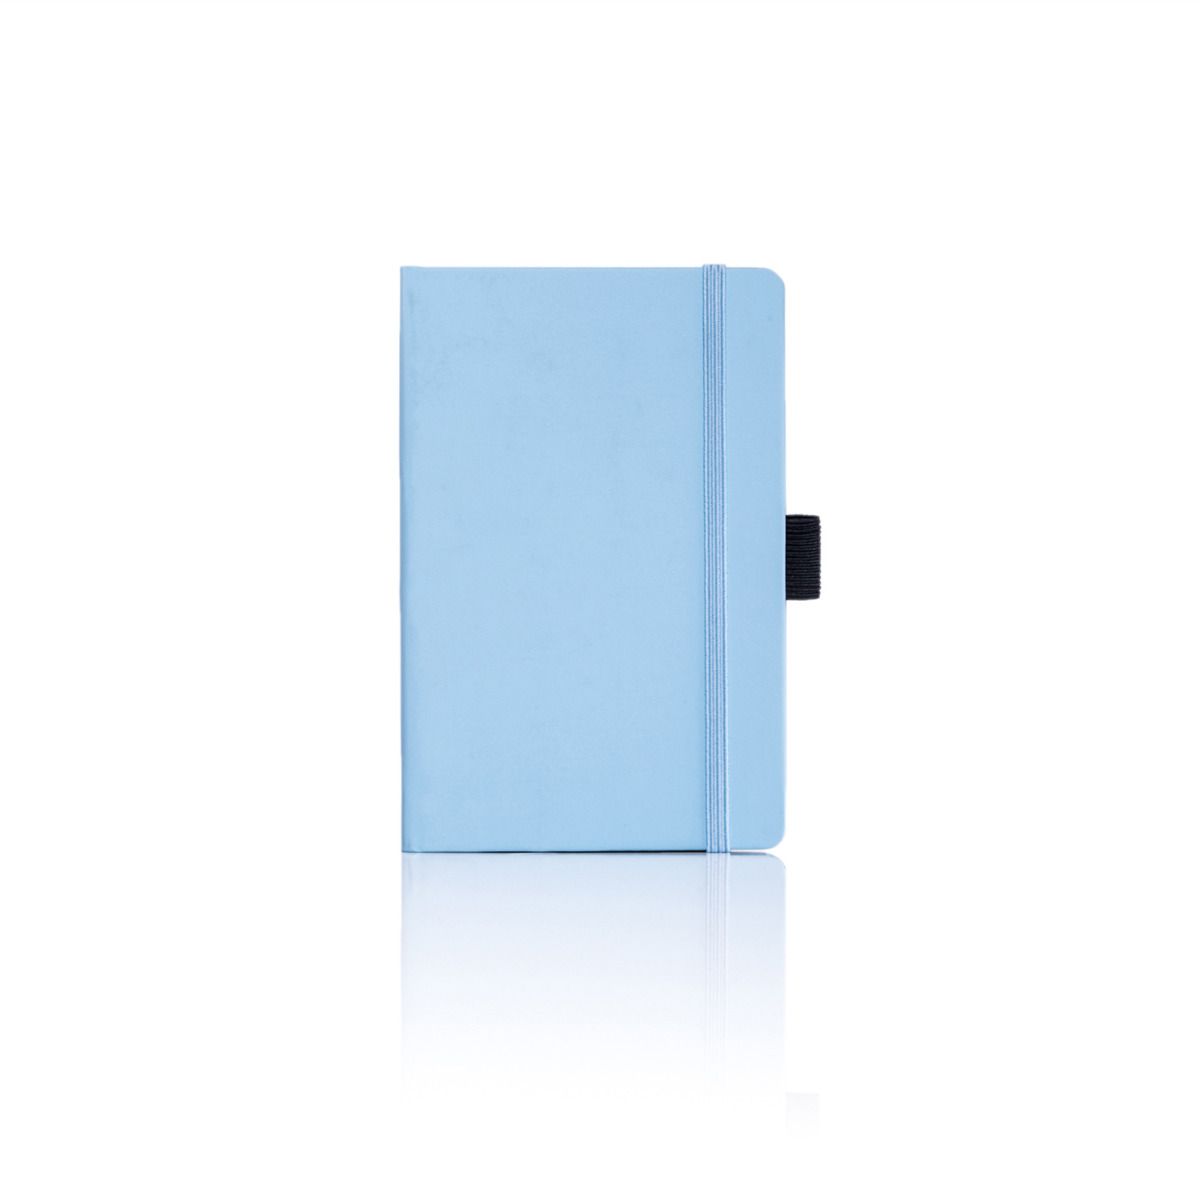 Baby Blue Matra Notebook - ideal as a gift item